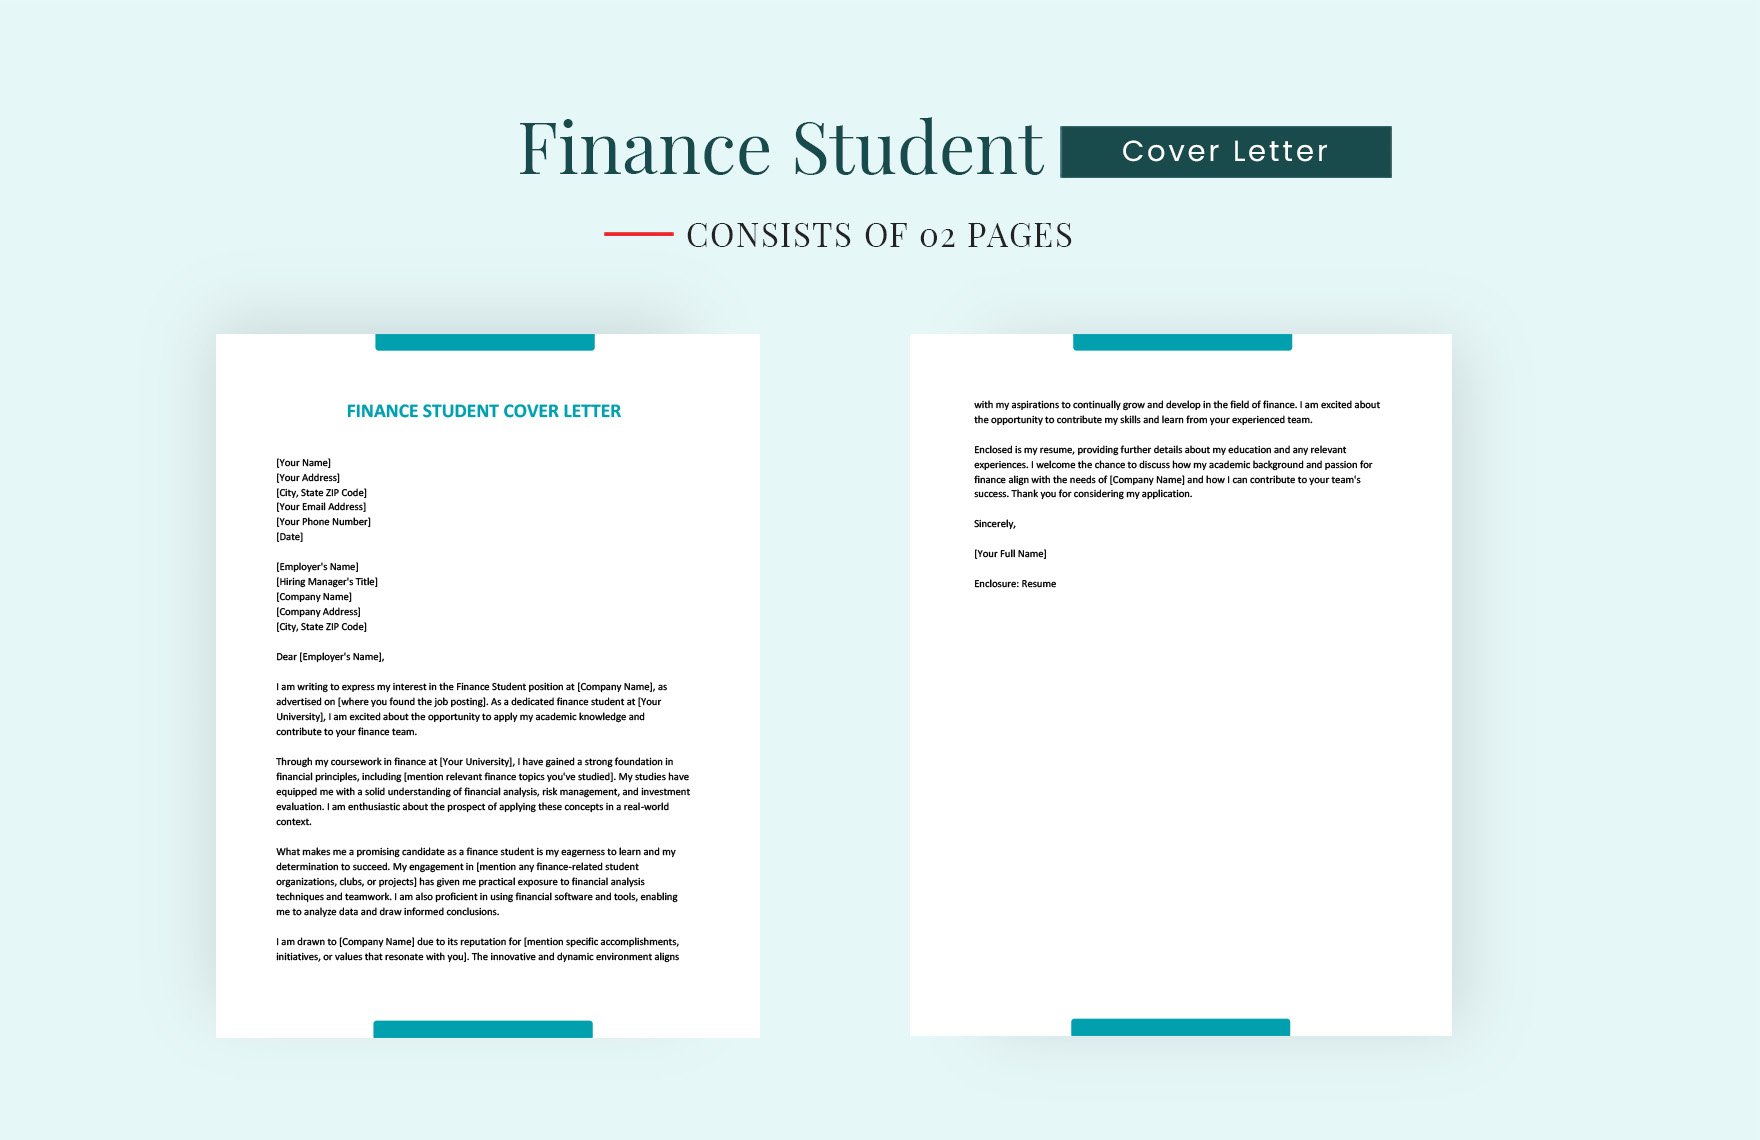 Finance Student Cover Letter in Word, Google Docs